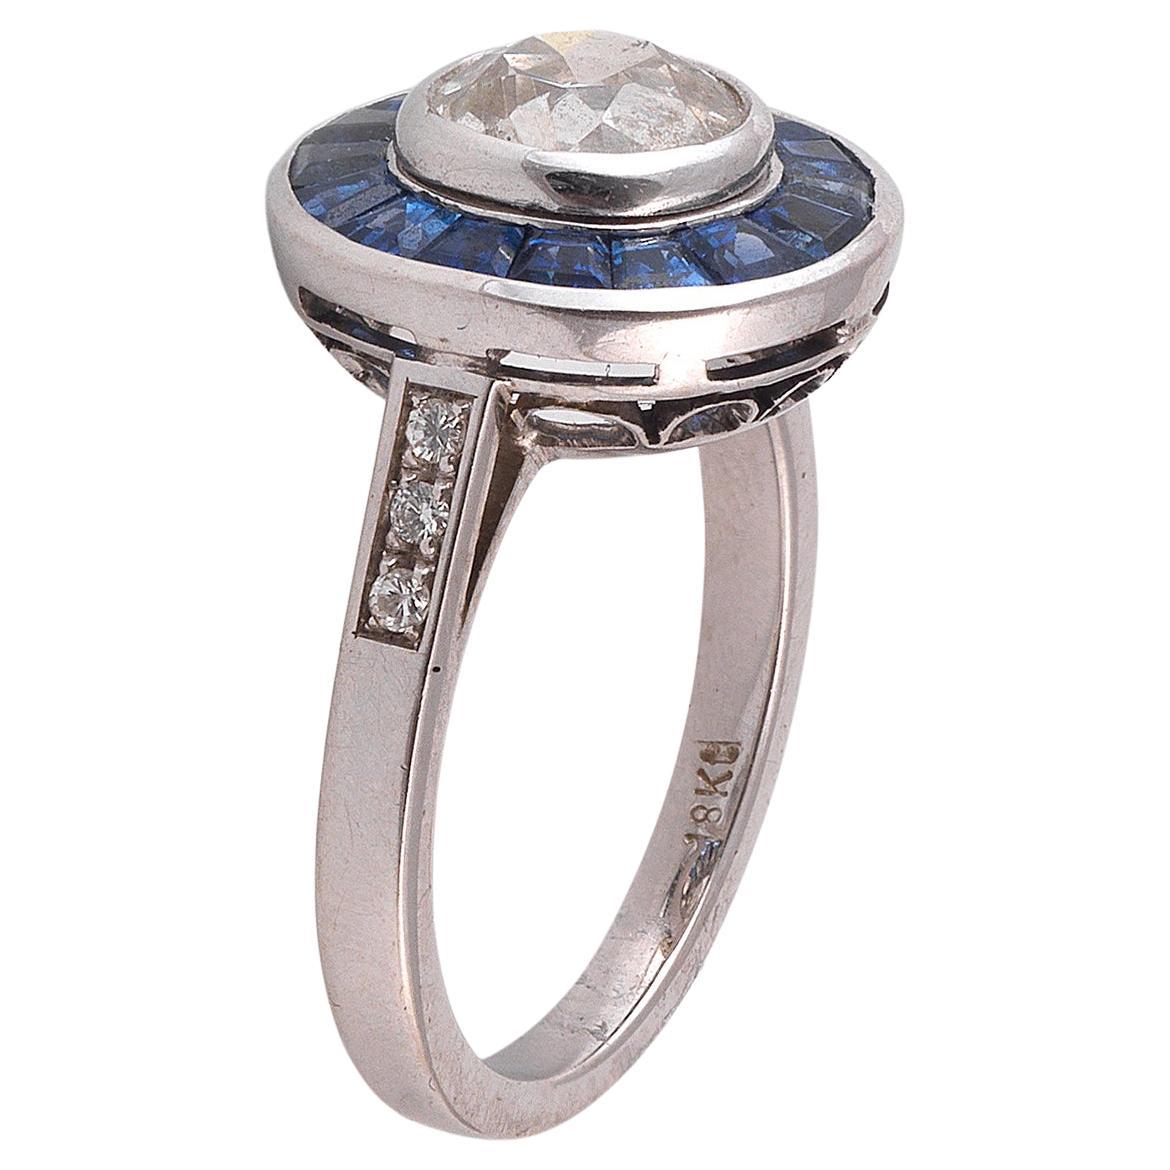 The central collet set old cut diamond weighing approx. 1.72 cts to a calibre-cut sapphire surround, plain hoop, mounted in white gold.

Weight: 6,3 gr

Finger size: 7